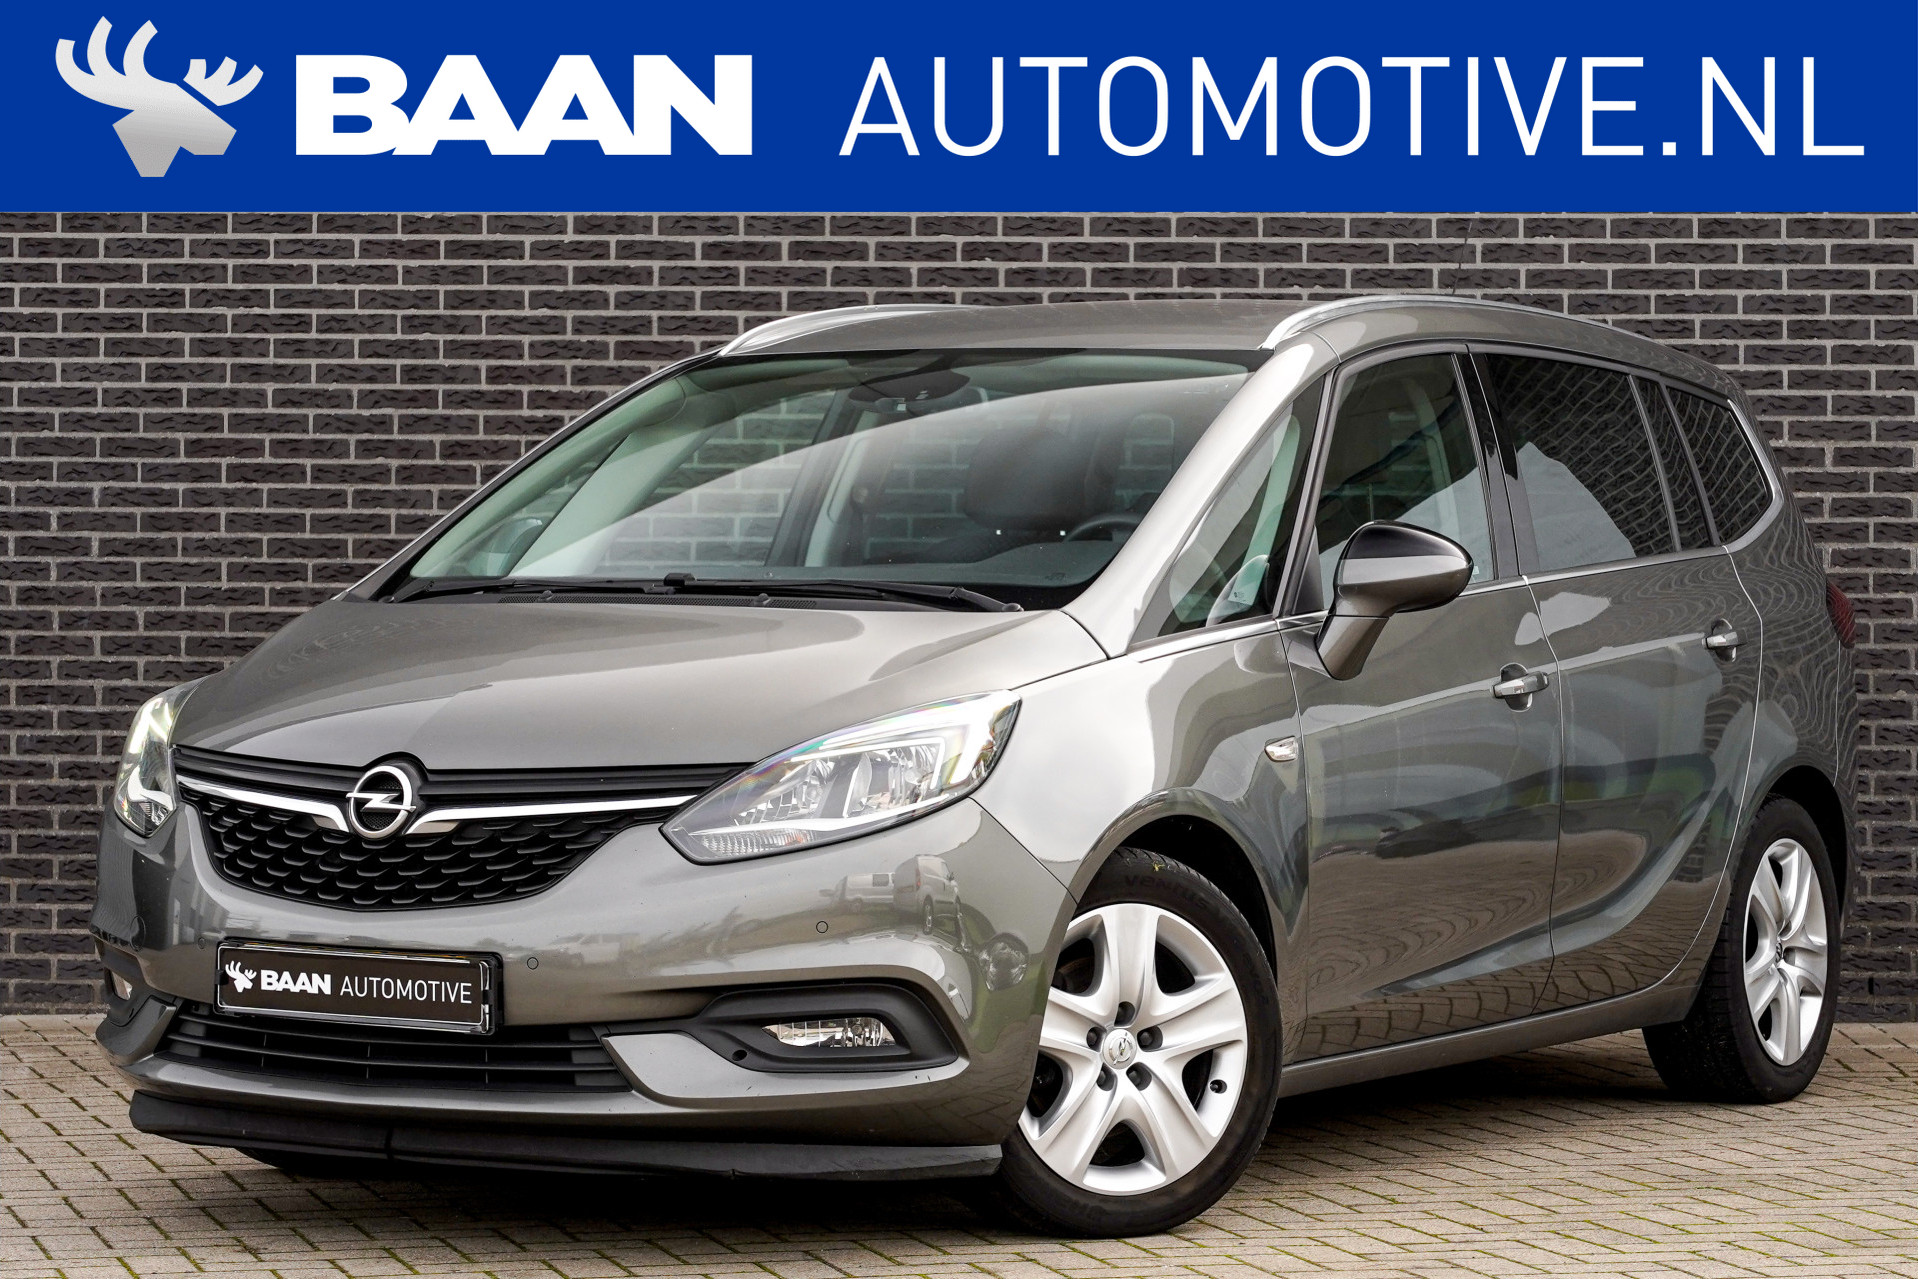 Opel Zafira 1.4 Turbo Business Executive 7 persoons | Navigatie | Airco | Cruise Control bij viaBOVAG.nl